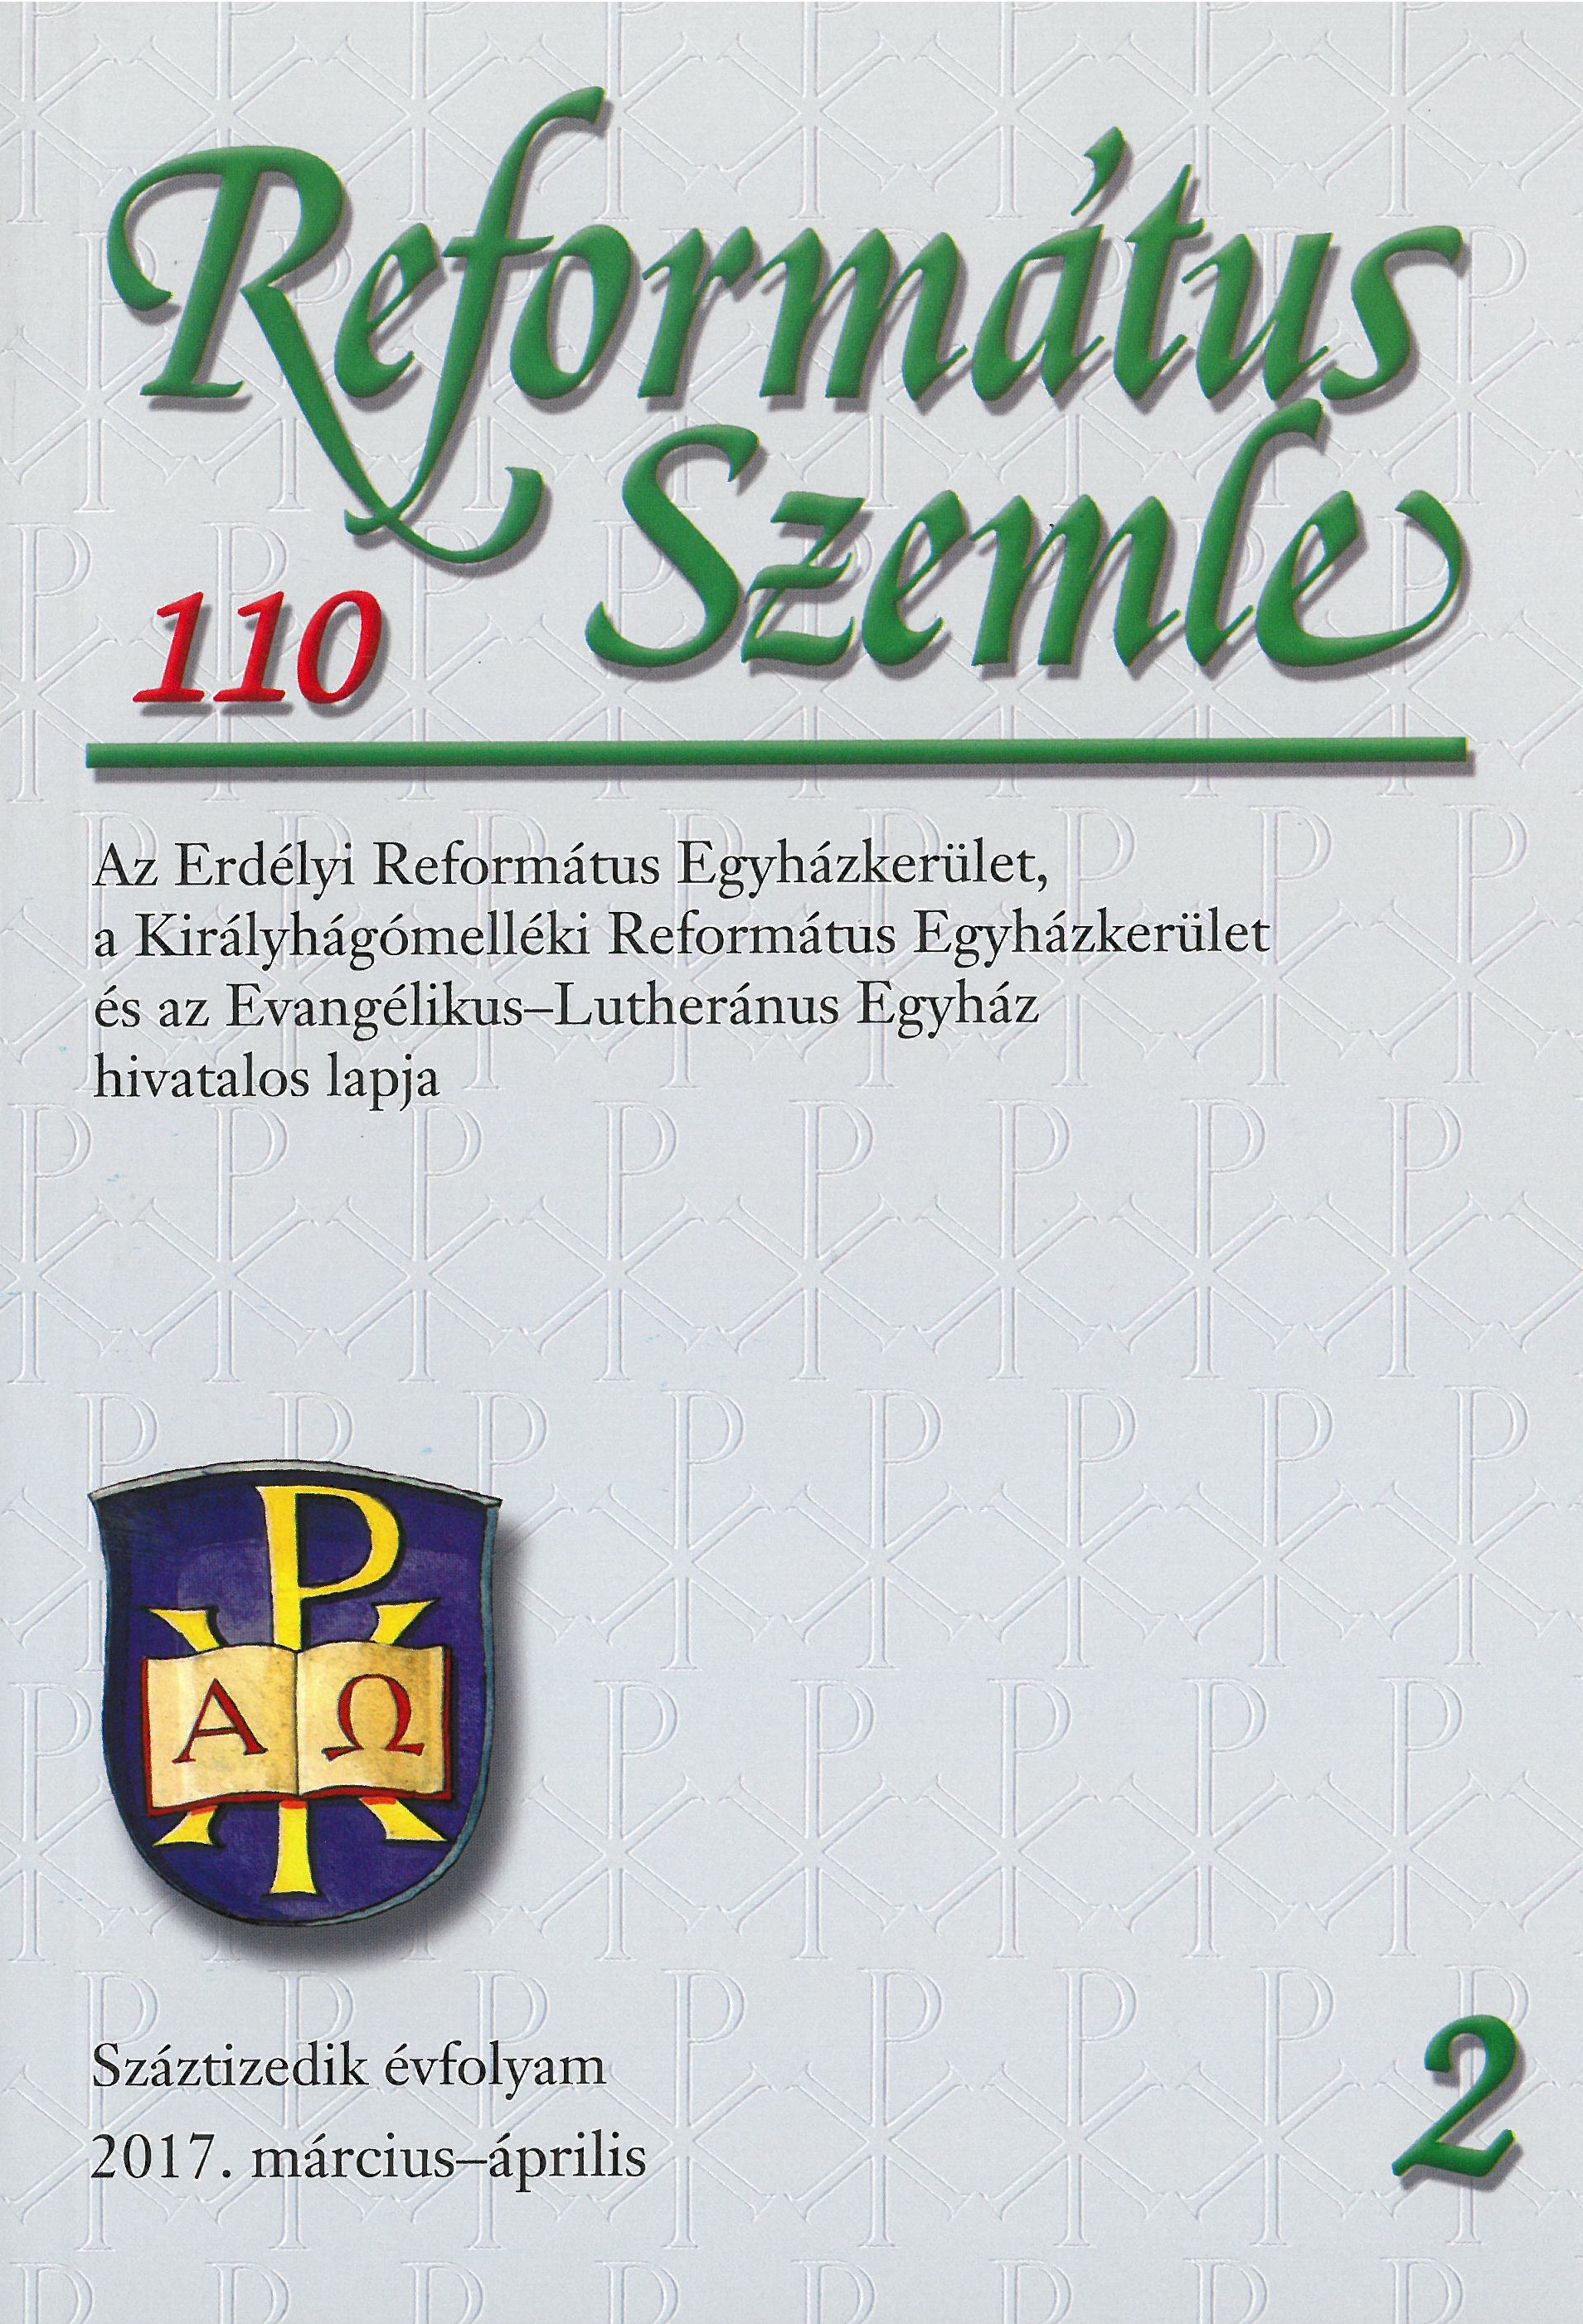 Addenda to a Volume. Three 17th Century Resolutions
from the Protocols of the Partial Synods of the Reformed Diocese of Küküllő Cover Image